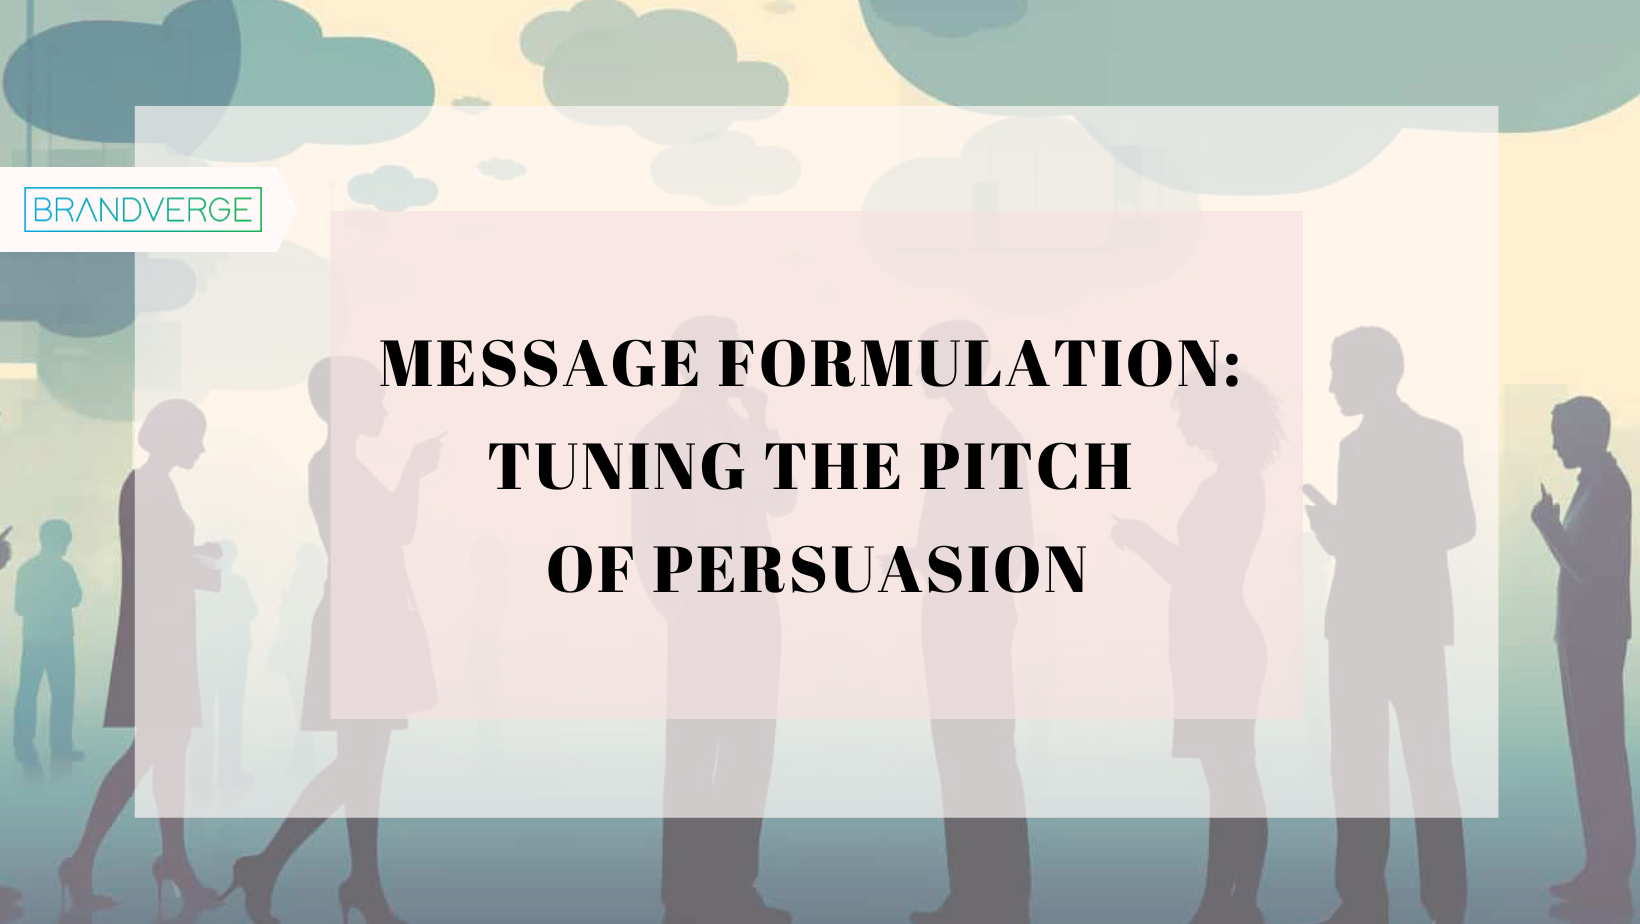 Tuning the Pitch of Persuasion